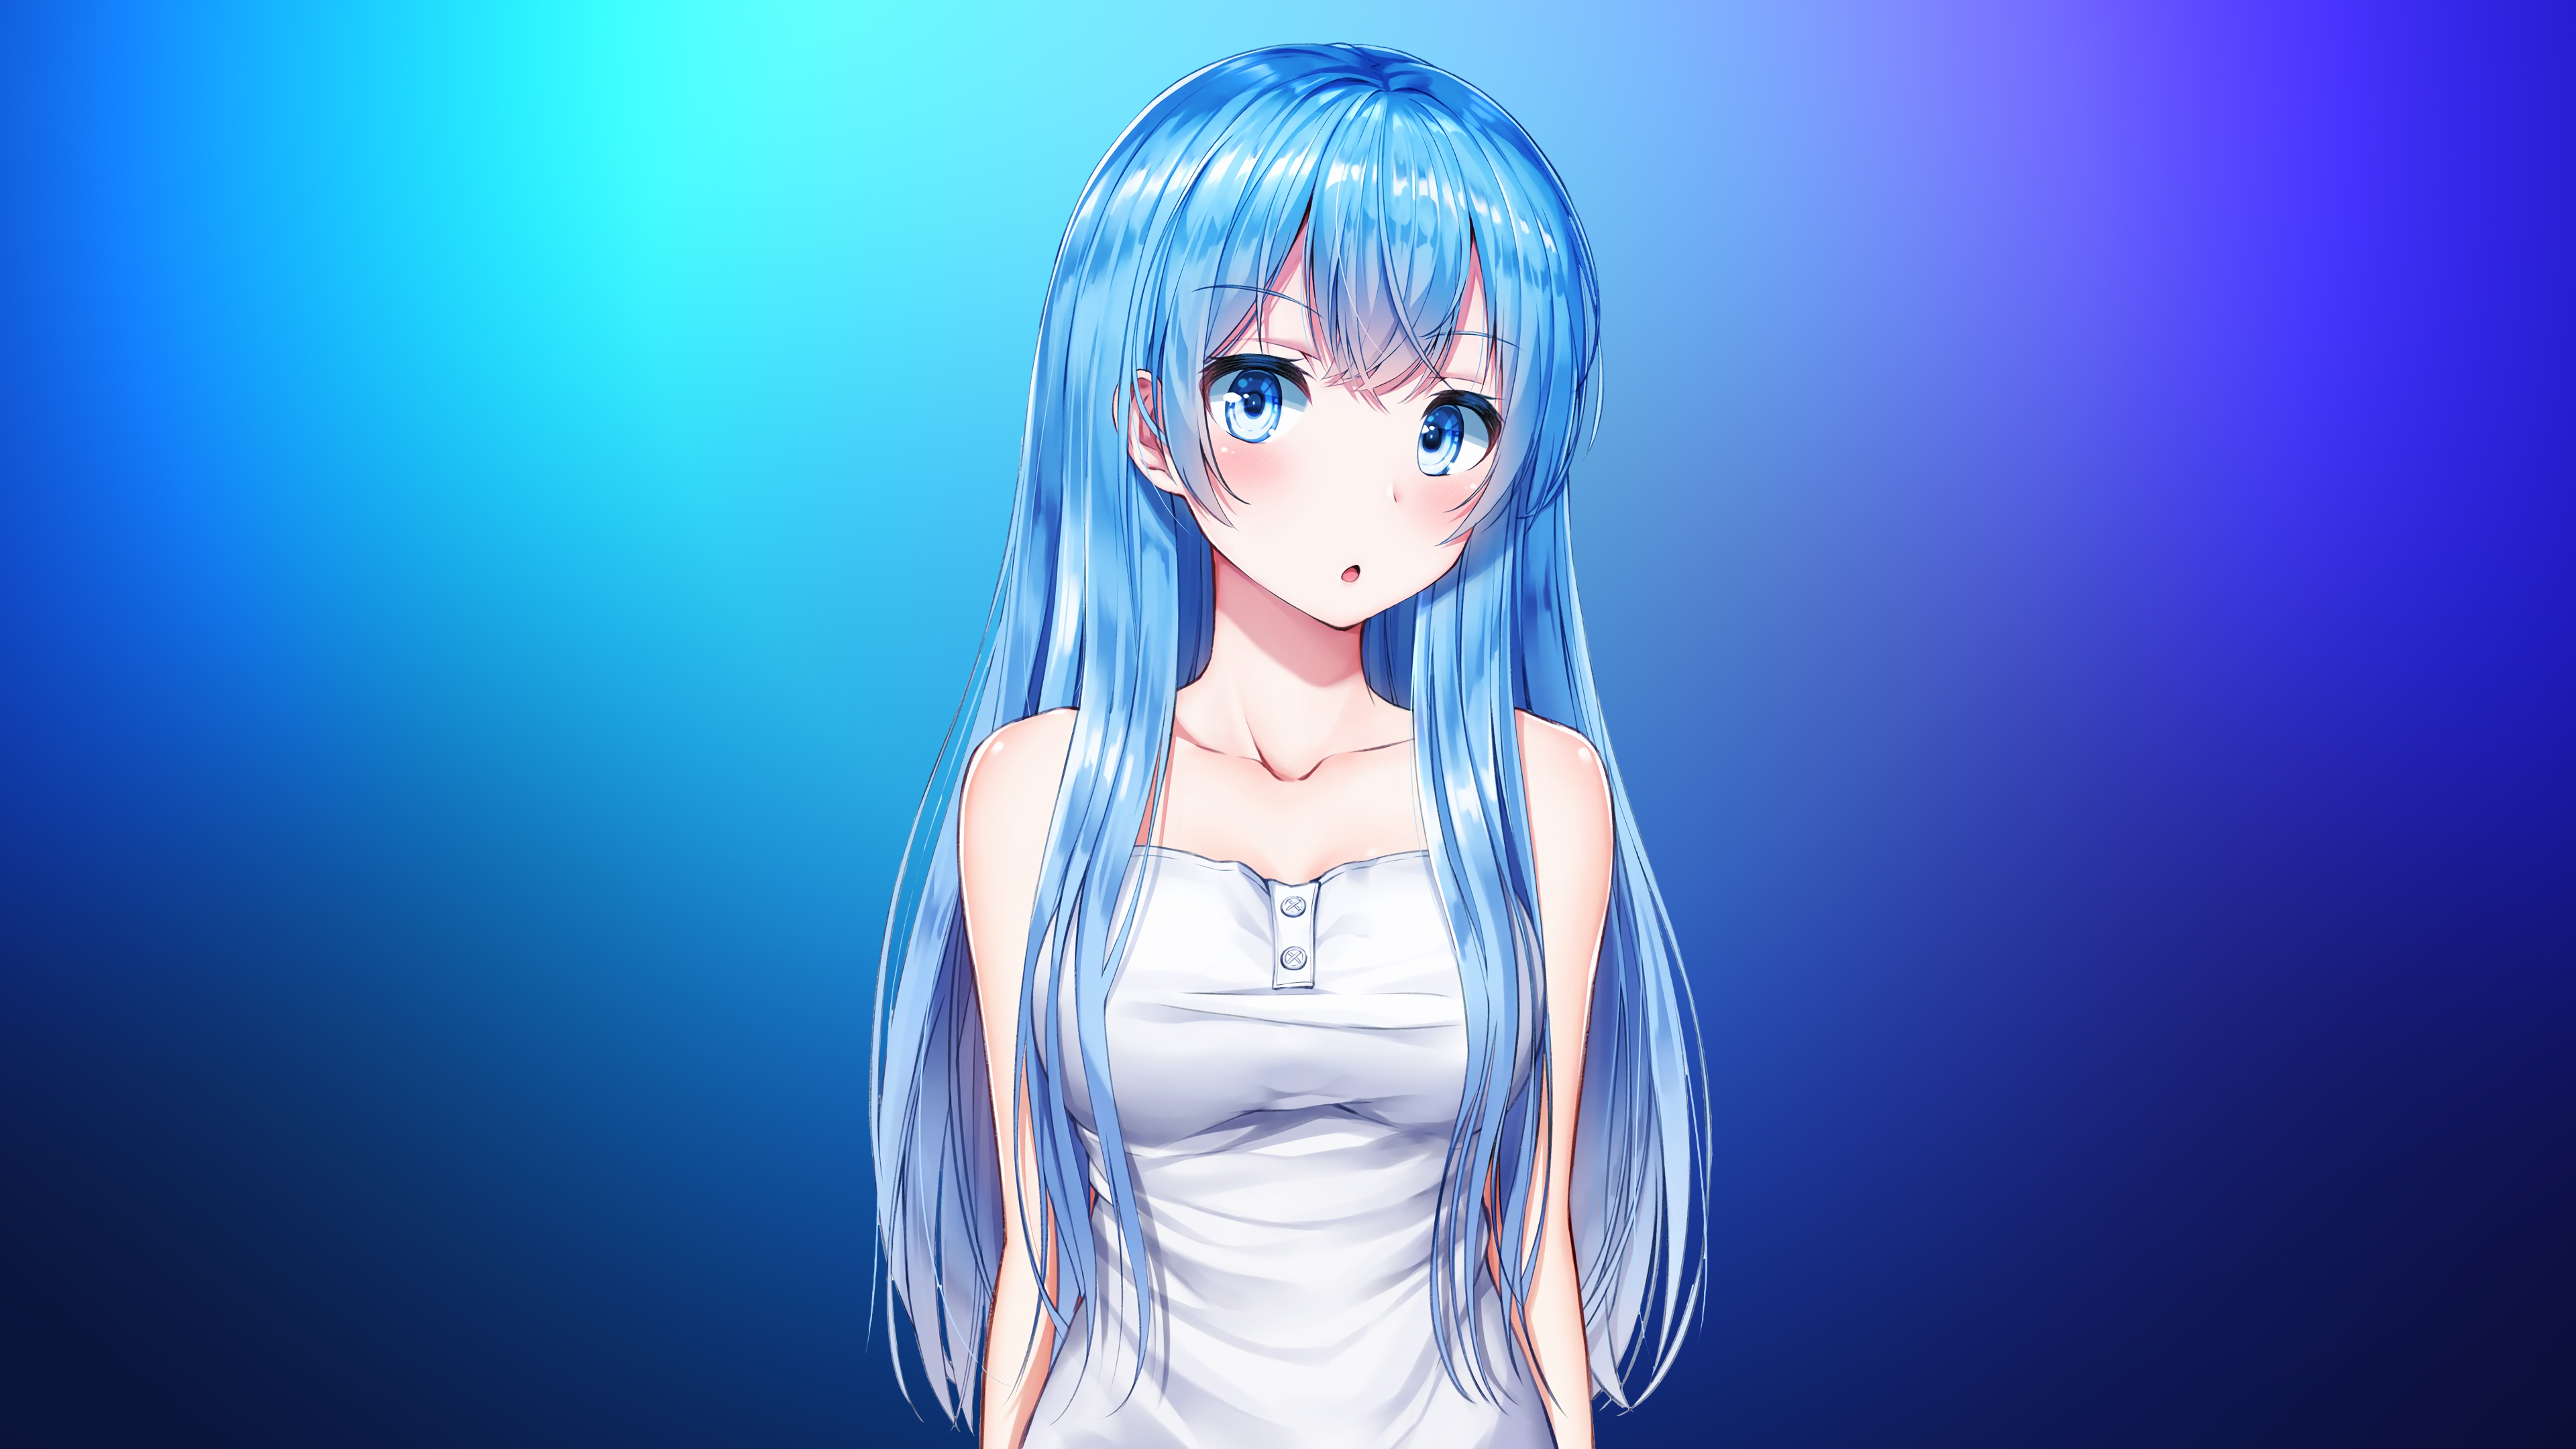 1920x1200 Anime Girl Aqua Blue 4k 1080P Resolution HD 4k Wallpapers, Images, Backgrounds, Photos 